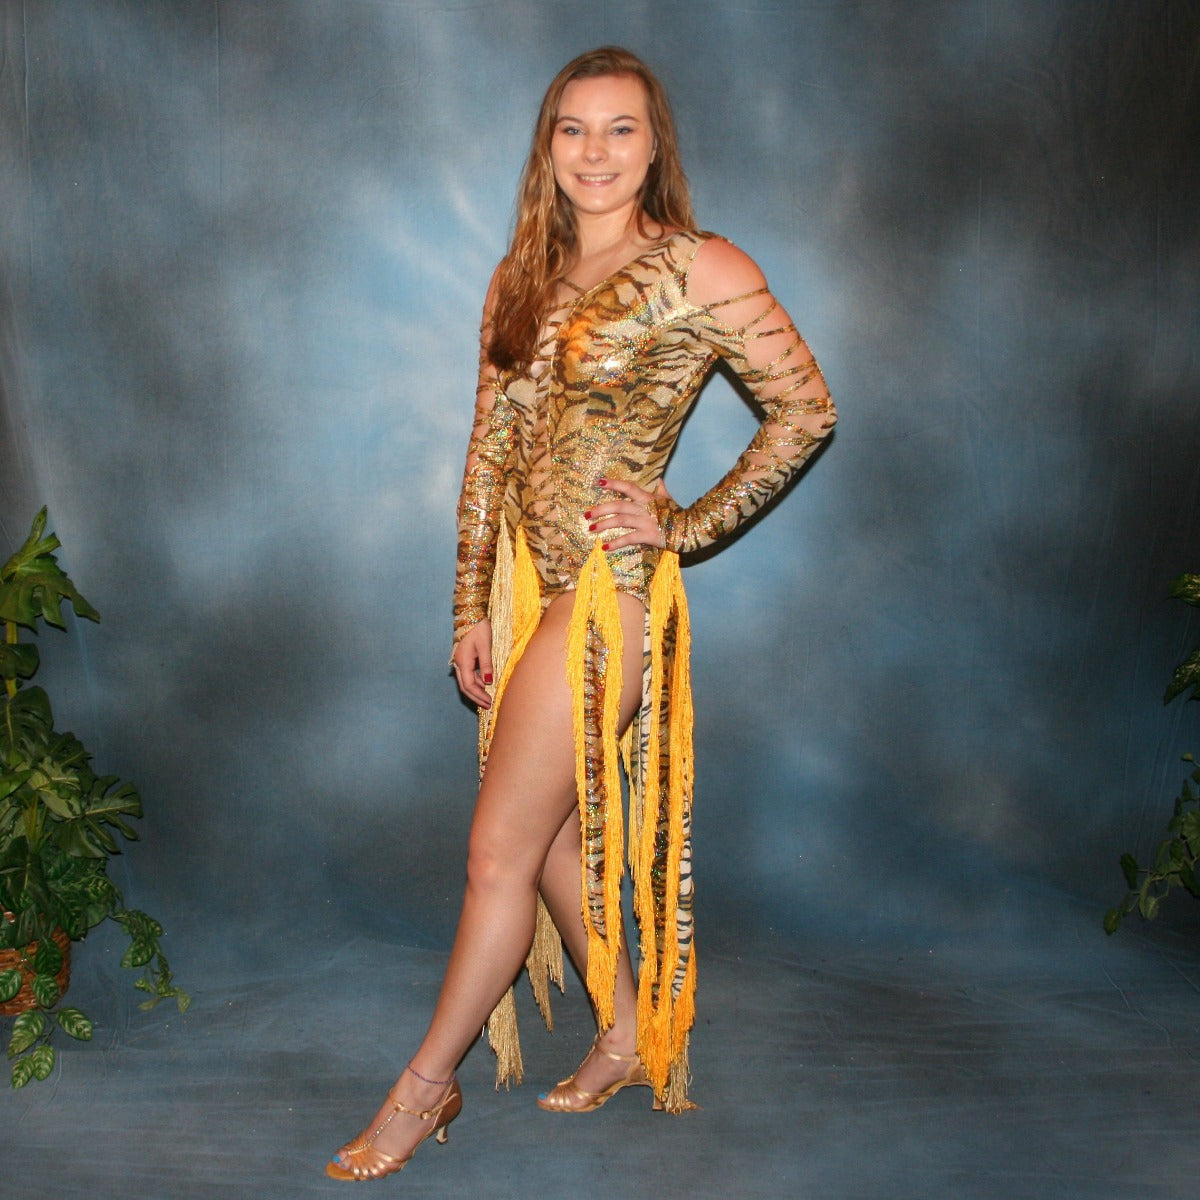 Crystal's Creations side view of gold hologram tiger print Latin/rhythm dress with fringe szie 5/6-9/10